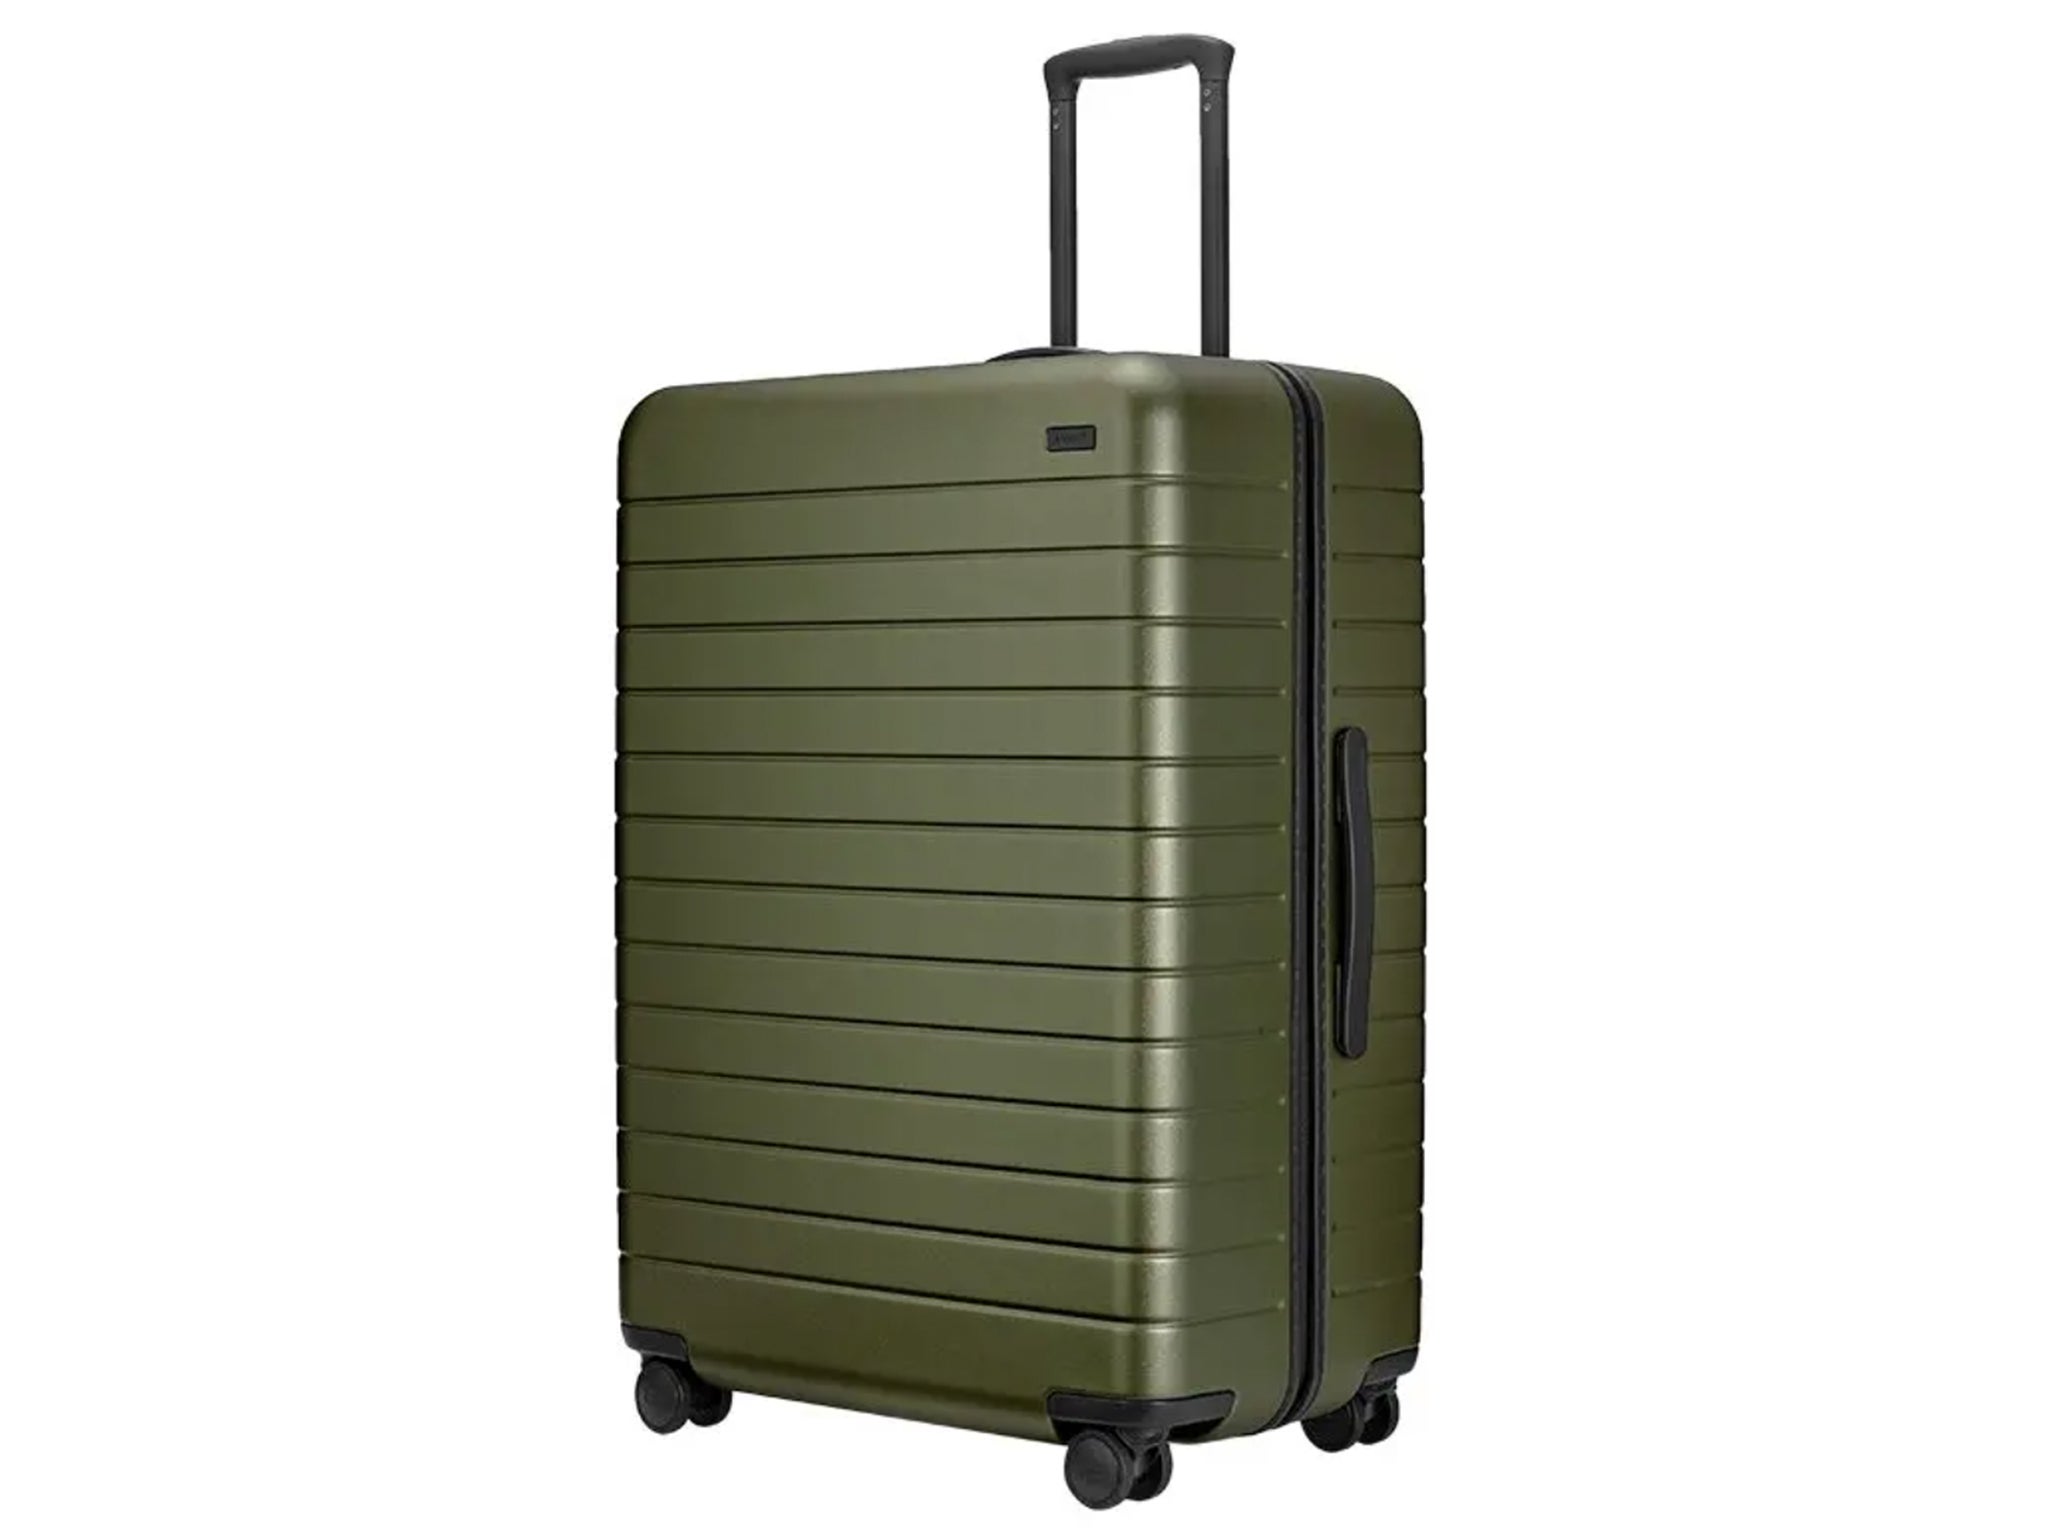 For a longer trip, ensure your never run out of room with this spacious suitcase